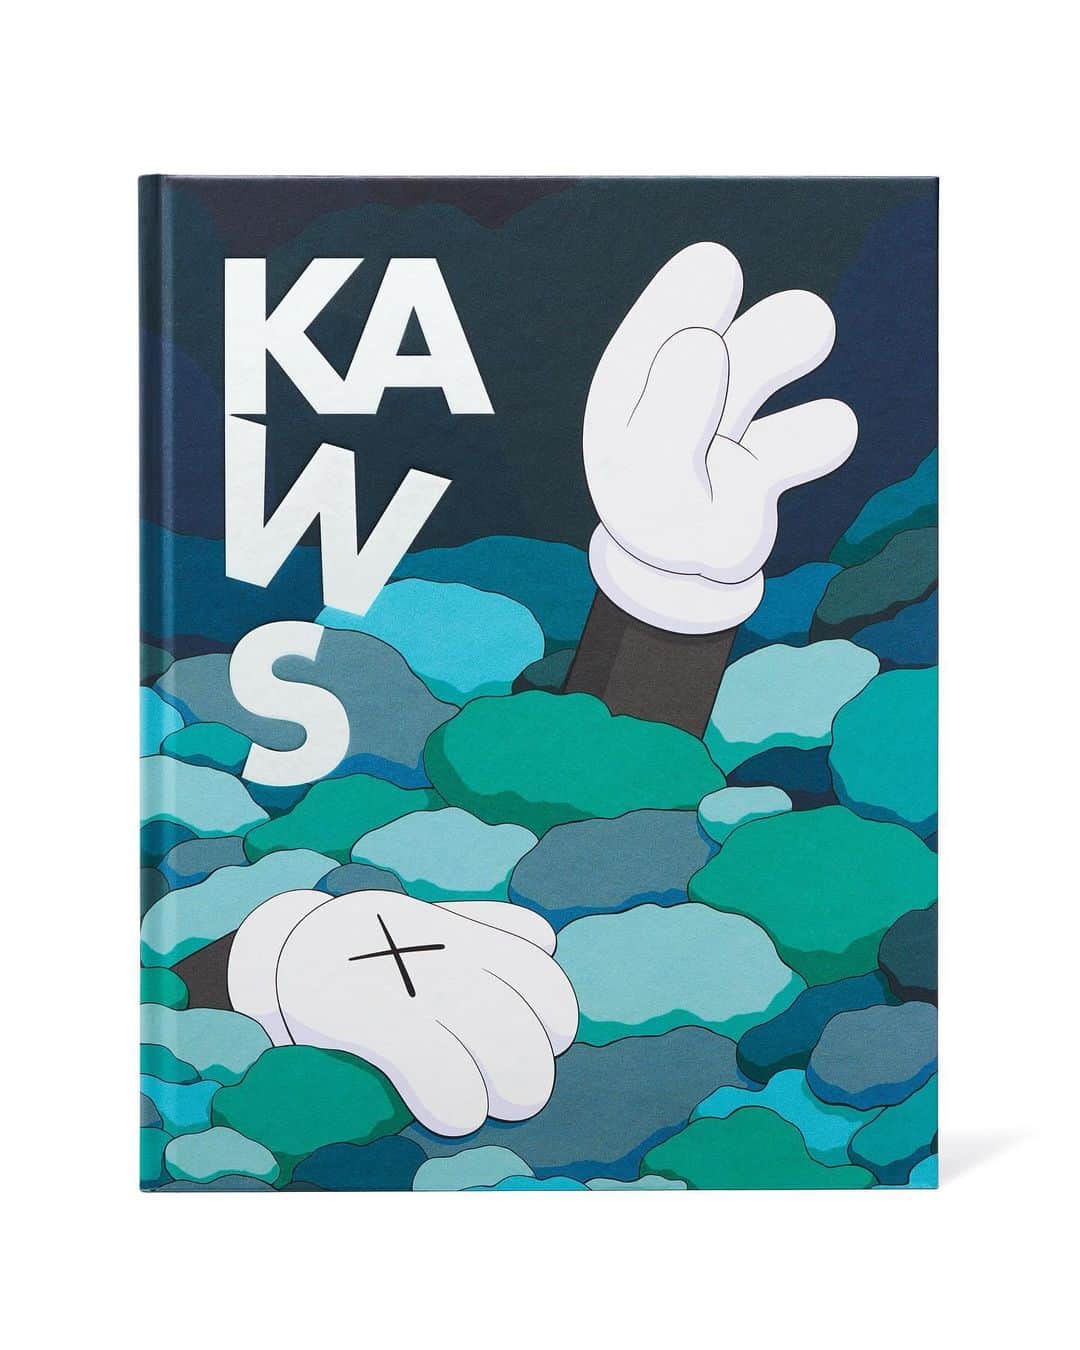 KAWSONEのインスタグラム：「KAWS: SPOKE TOO SOON book available Friday December 15, 10:00 AM EST from @skarstedtgallery.  Published on the occasion of the exhibition KAWS: SPOKE TOO SOON at Skarstedt, New York, this catalogue features full plate images, details, and installation photographs, with custom fluorescent printing throughout.  Copies will be available for purchase directly on the Skarstedt website.  #KAWS #SPOKETOOSOON @KAWS @skarstedtgallery @generationpress @punktdotcom @jontywilde」